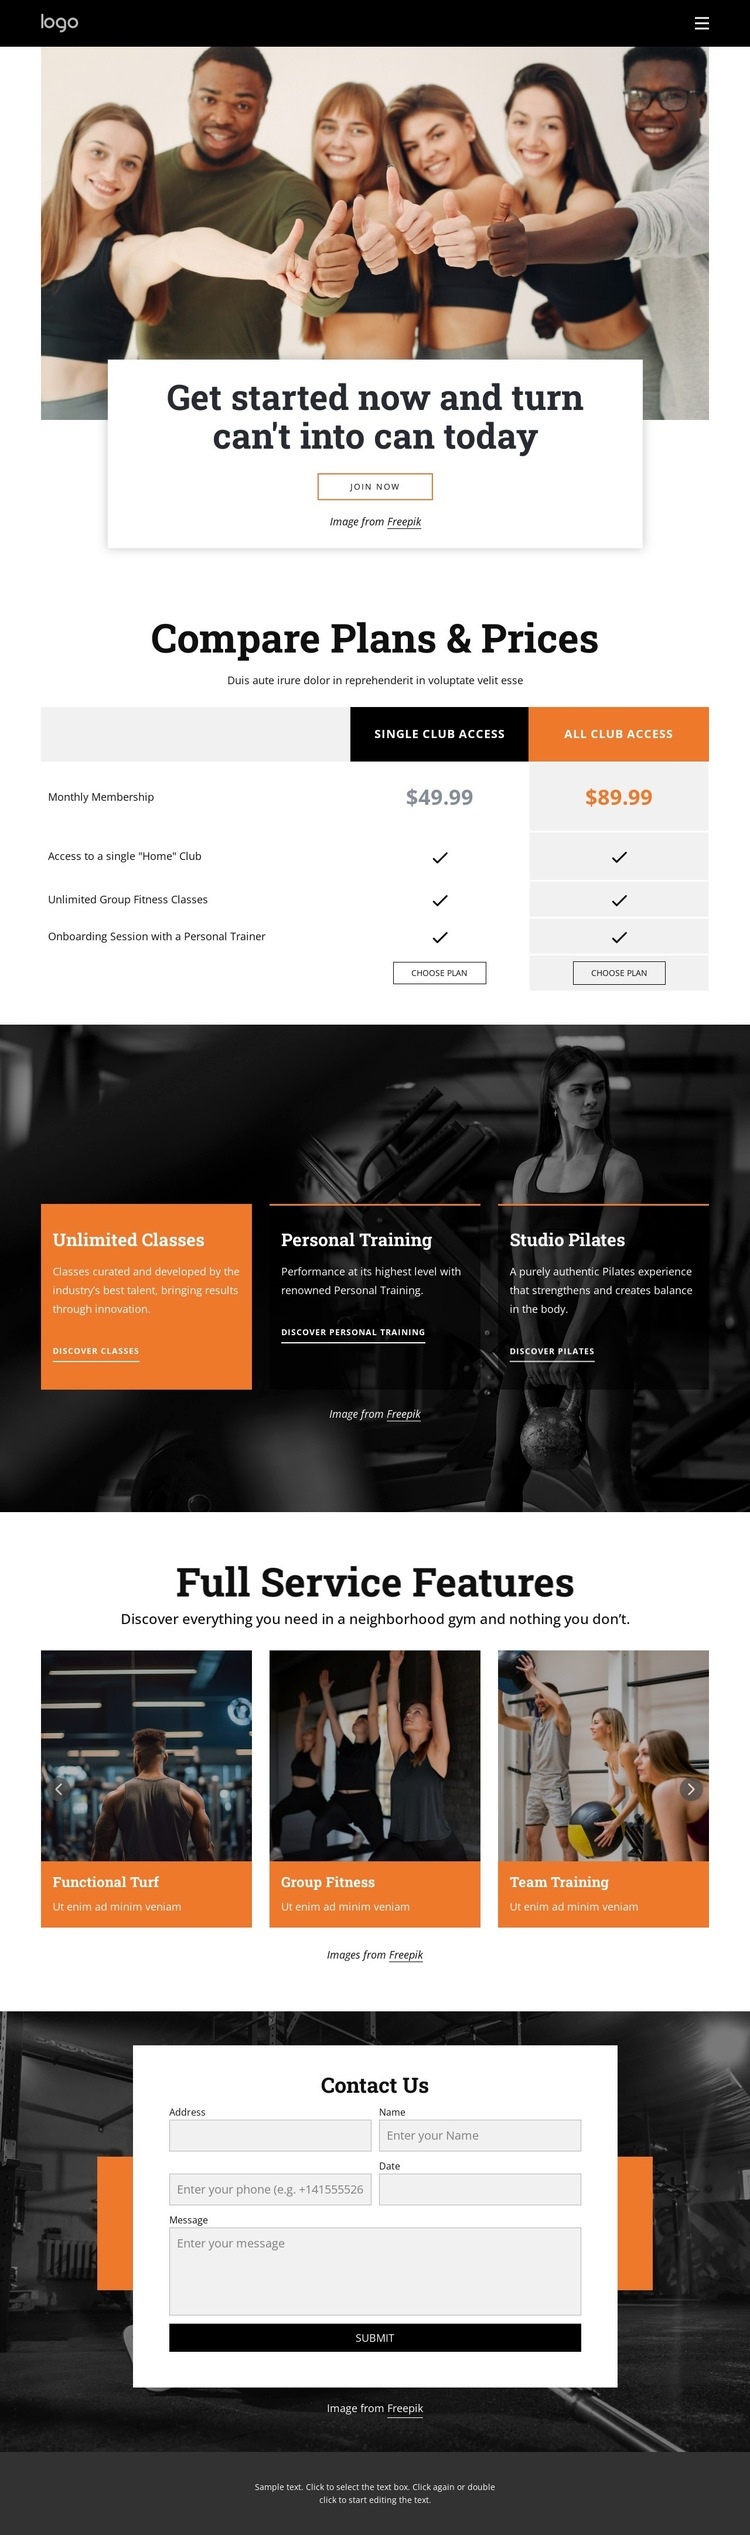 Exercise programs Web Page Design